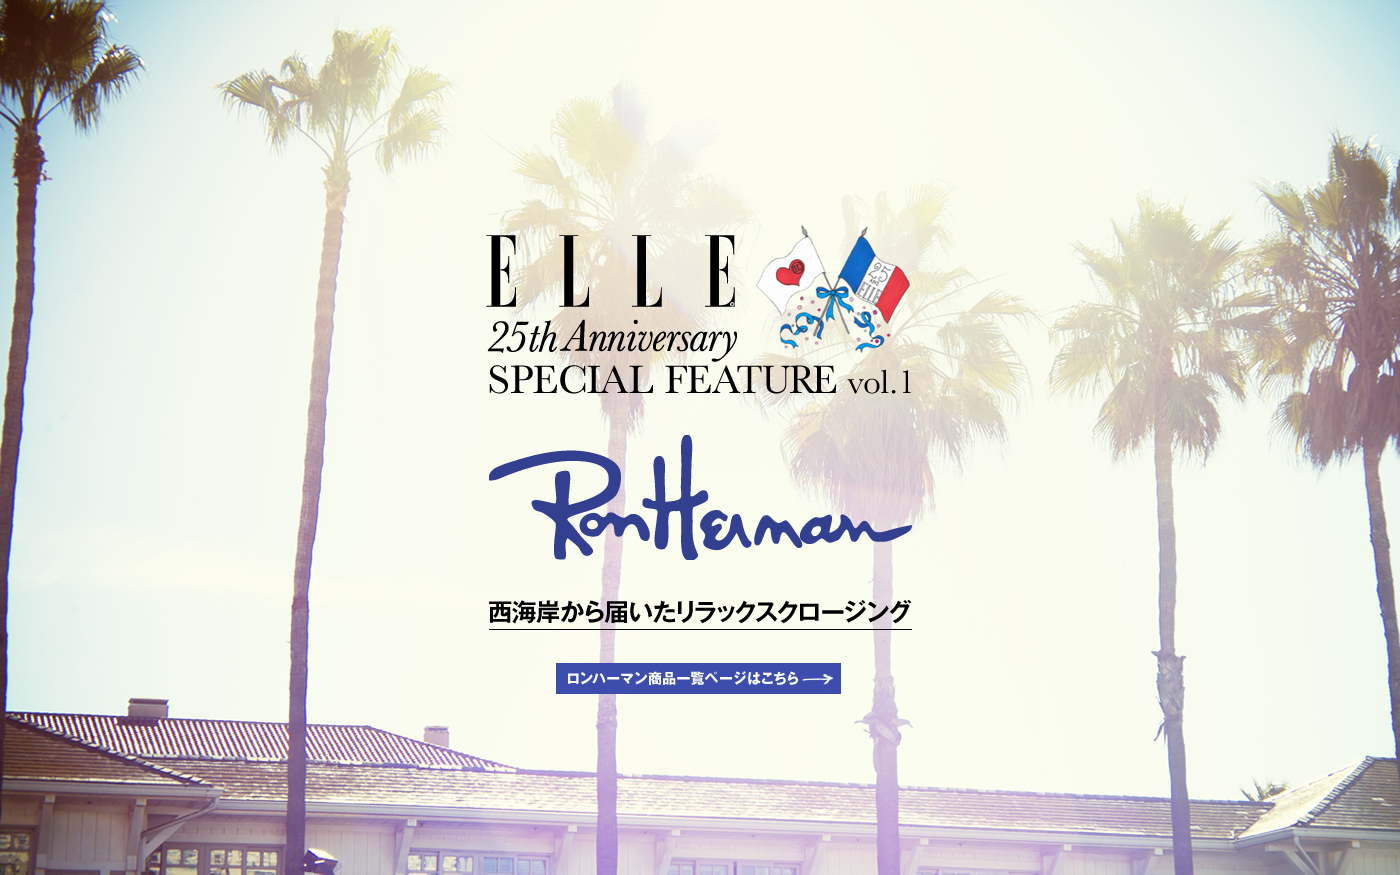 ELLE 25th Anniversary SPECIAL FEATURE vol.1 Ron Herman